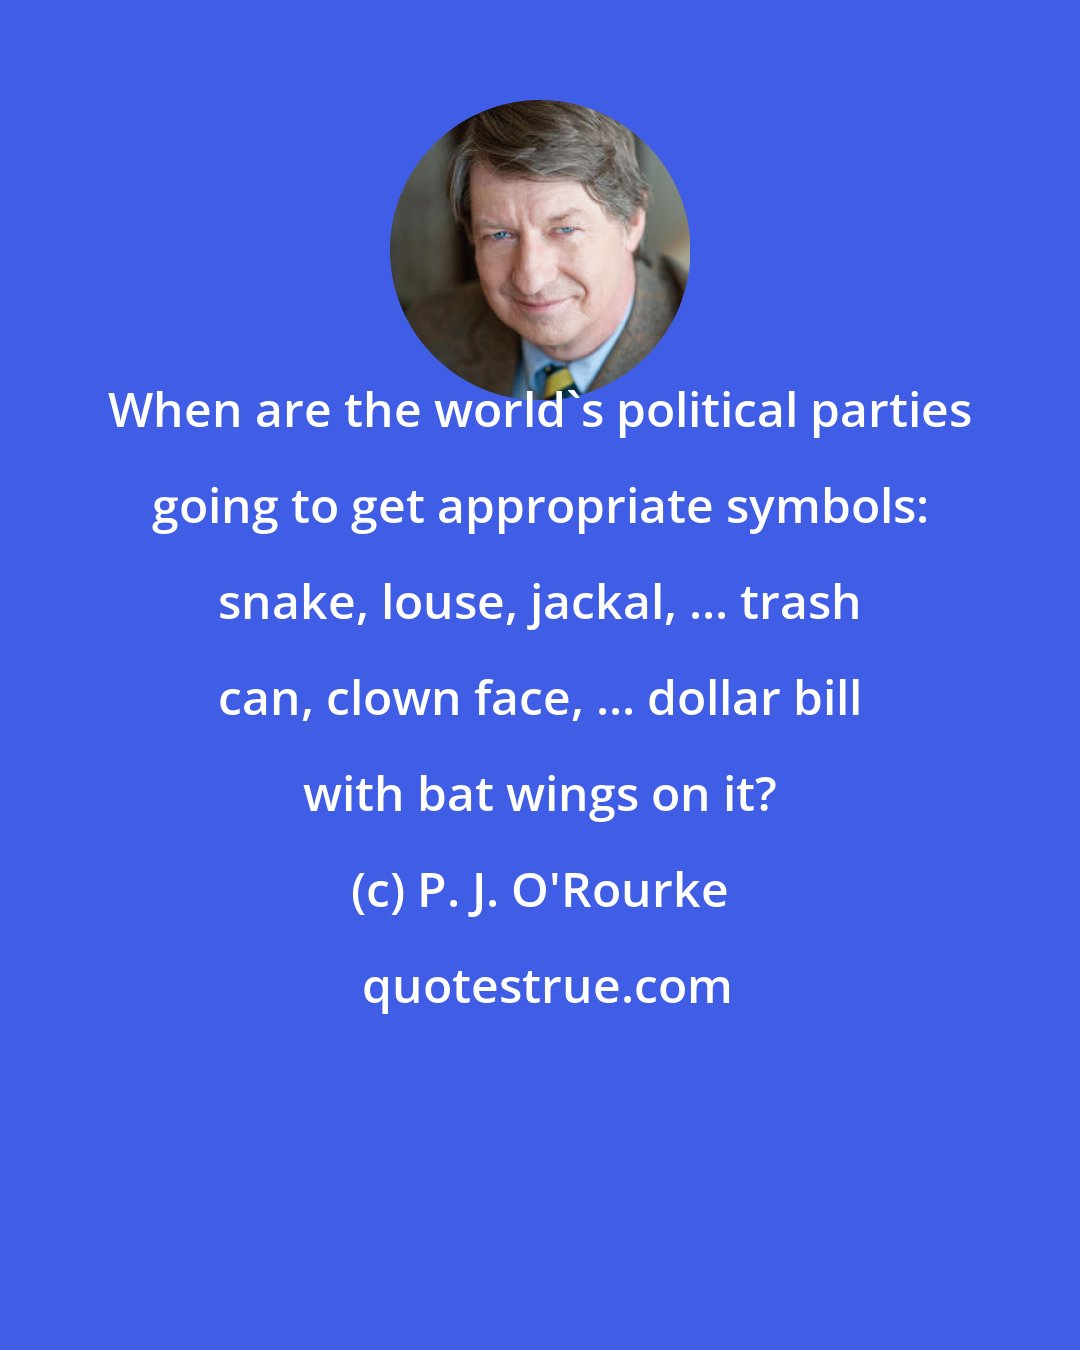 P. J. O'Rourke: When are the world's political parties going to get appropriate symbols: snake, louse, jackal, ... trash can, clown face, ... dollar bill with bat wings on it?